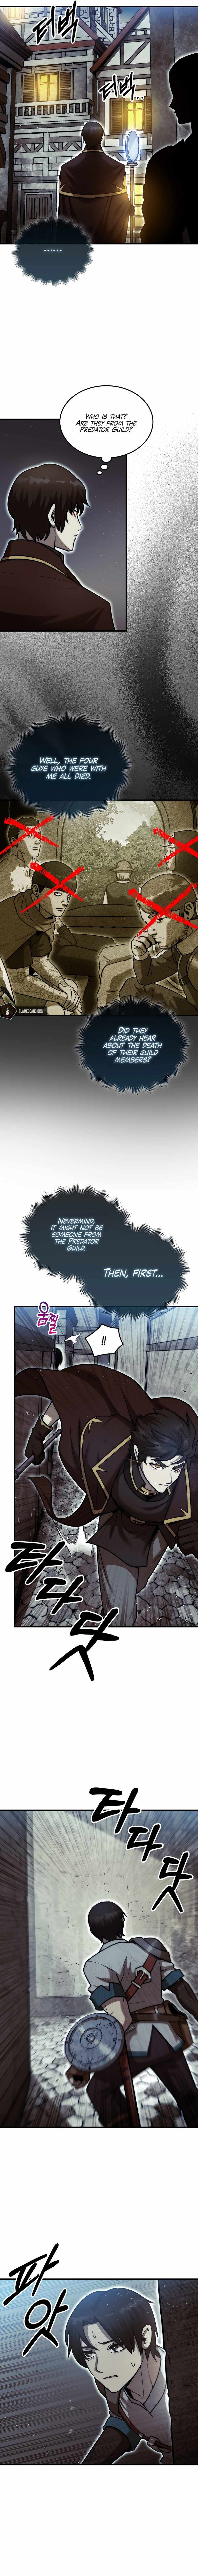 The 31st Piece Overturns the Board Chapter 24-eng-li - Page 6